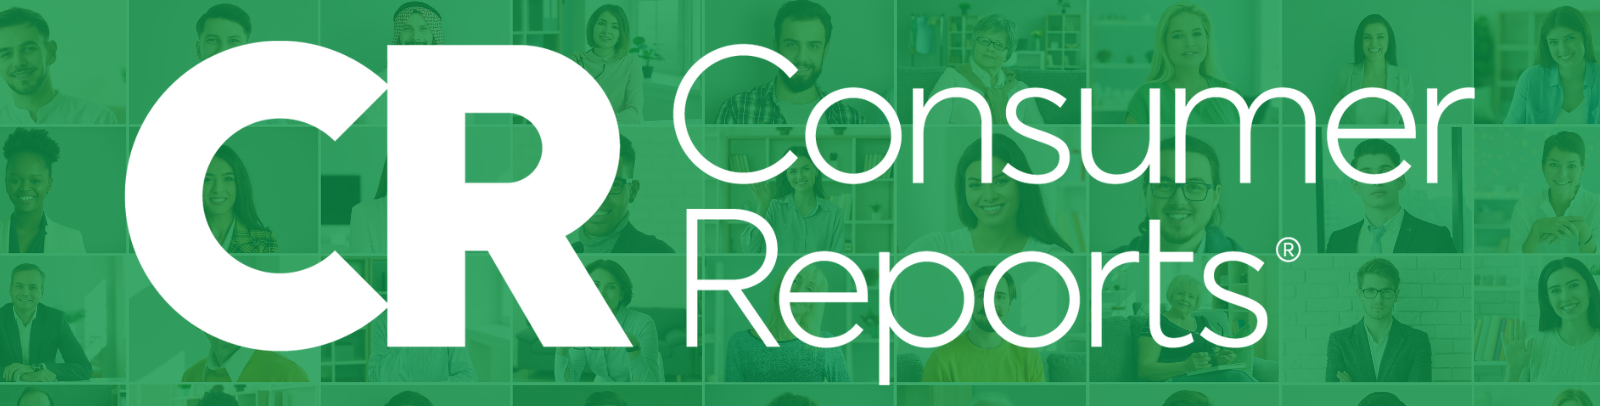 Consumer Reports logo on a collage of people's faces.